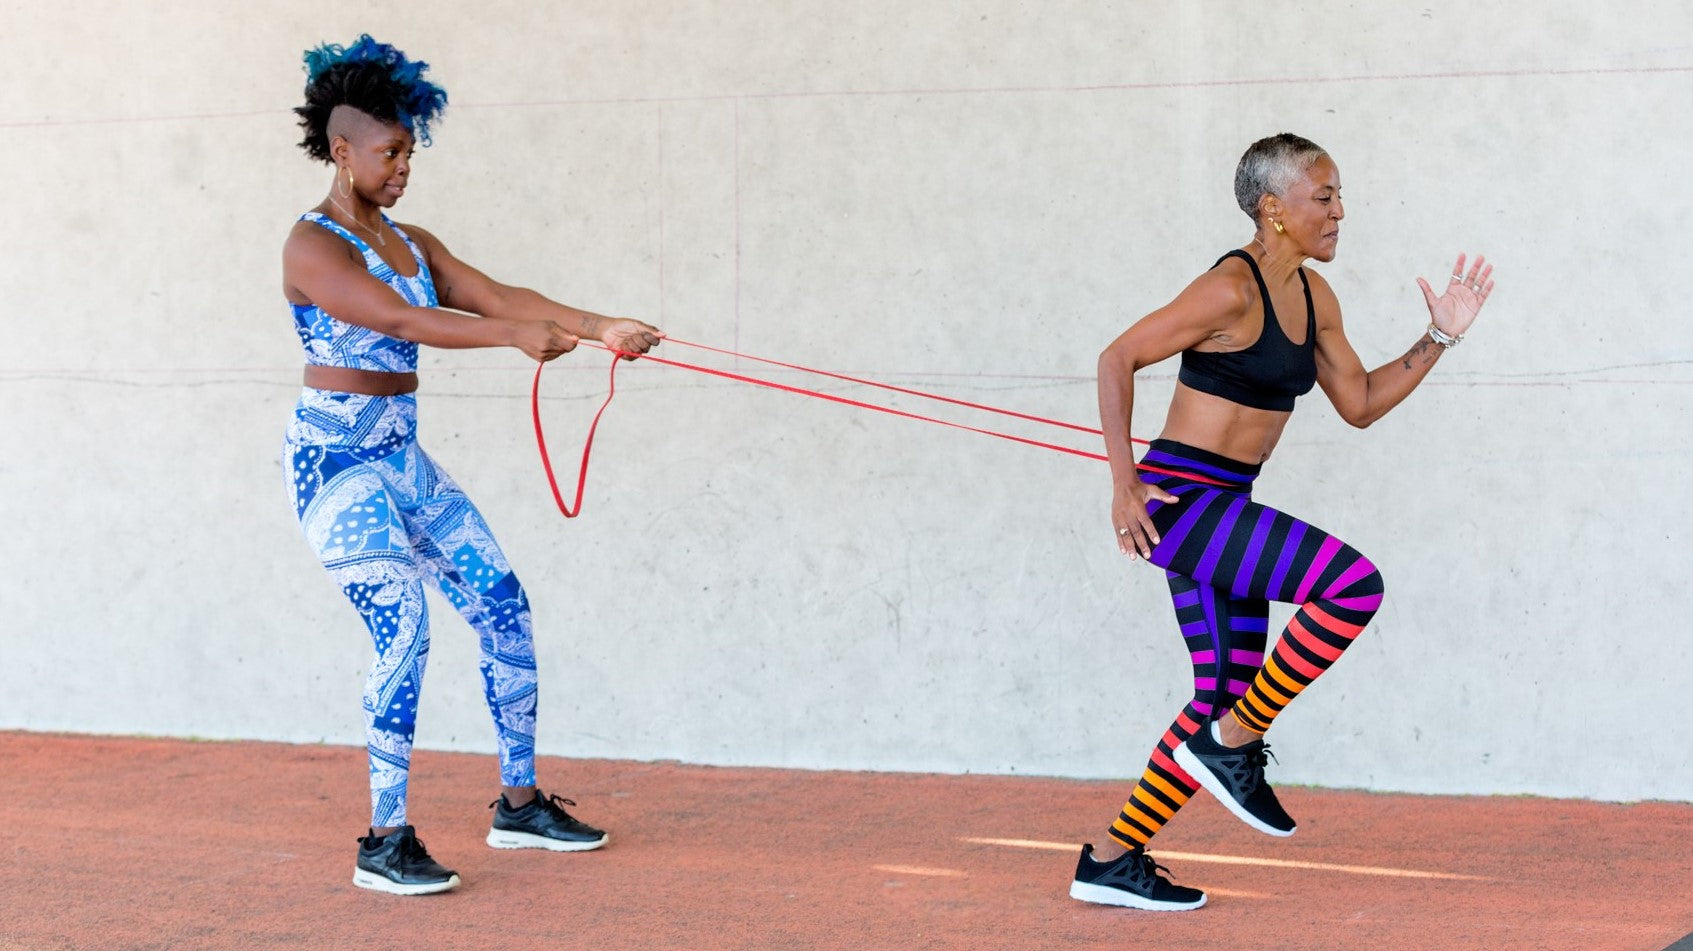 Women exercising. Woman on left is wearing a blue and white paisley bandana print top and bottom - print is called Imagine. Women on right is wearing black bra and striped pants in purple, pink, red, orange, and black - print is called Mabel Stripe.